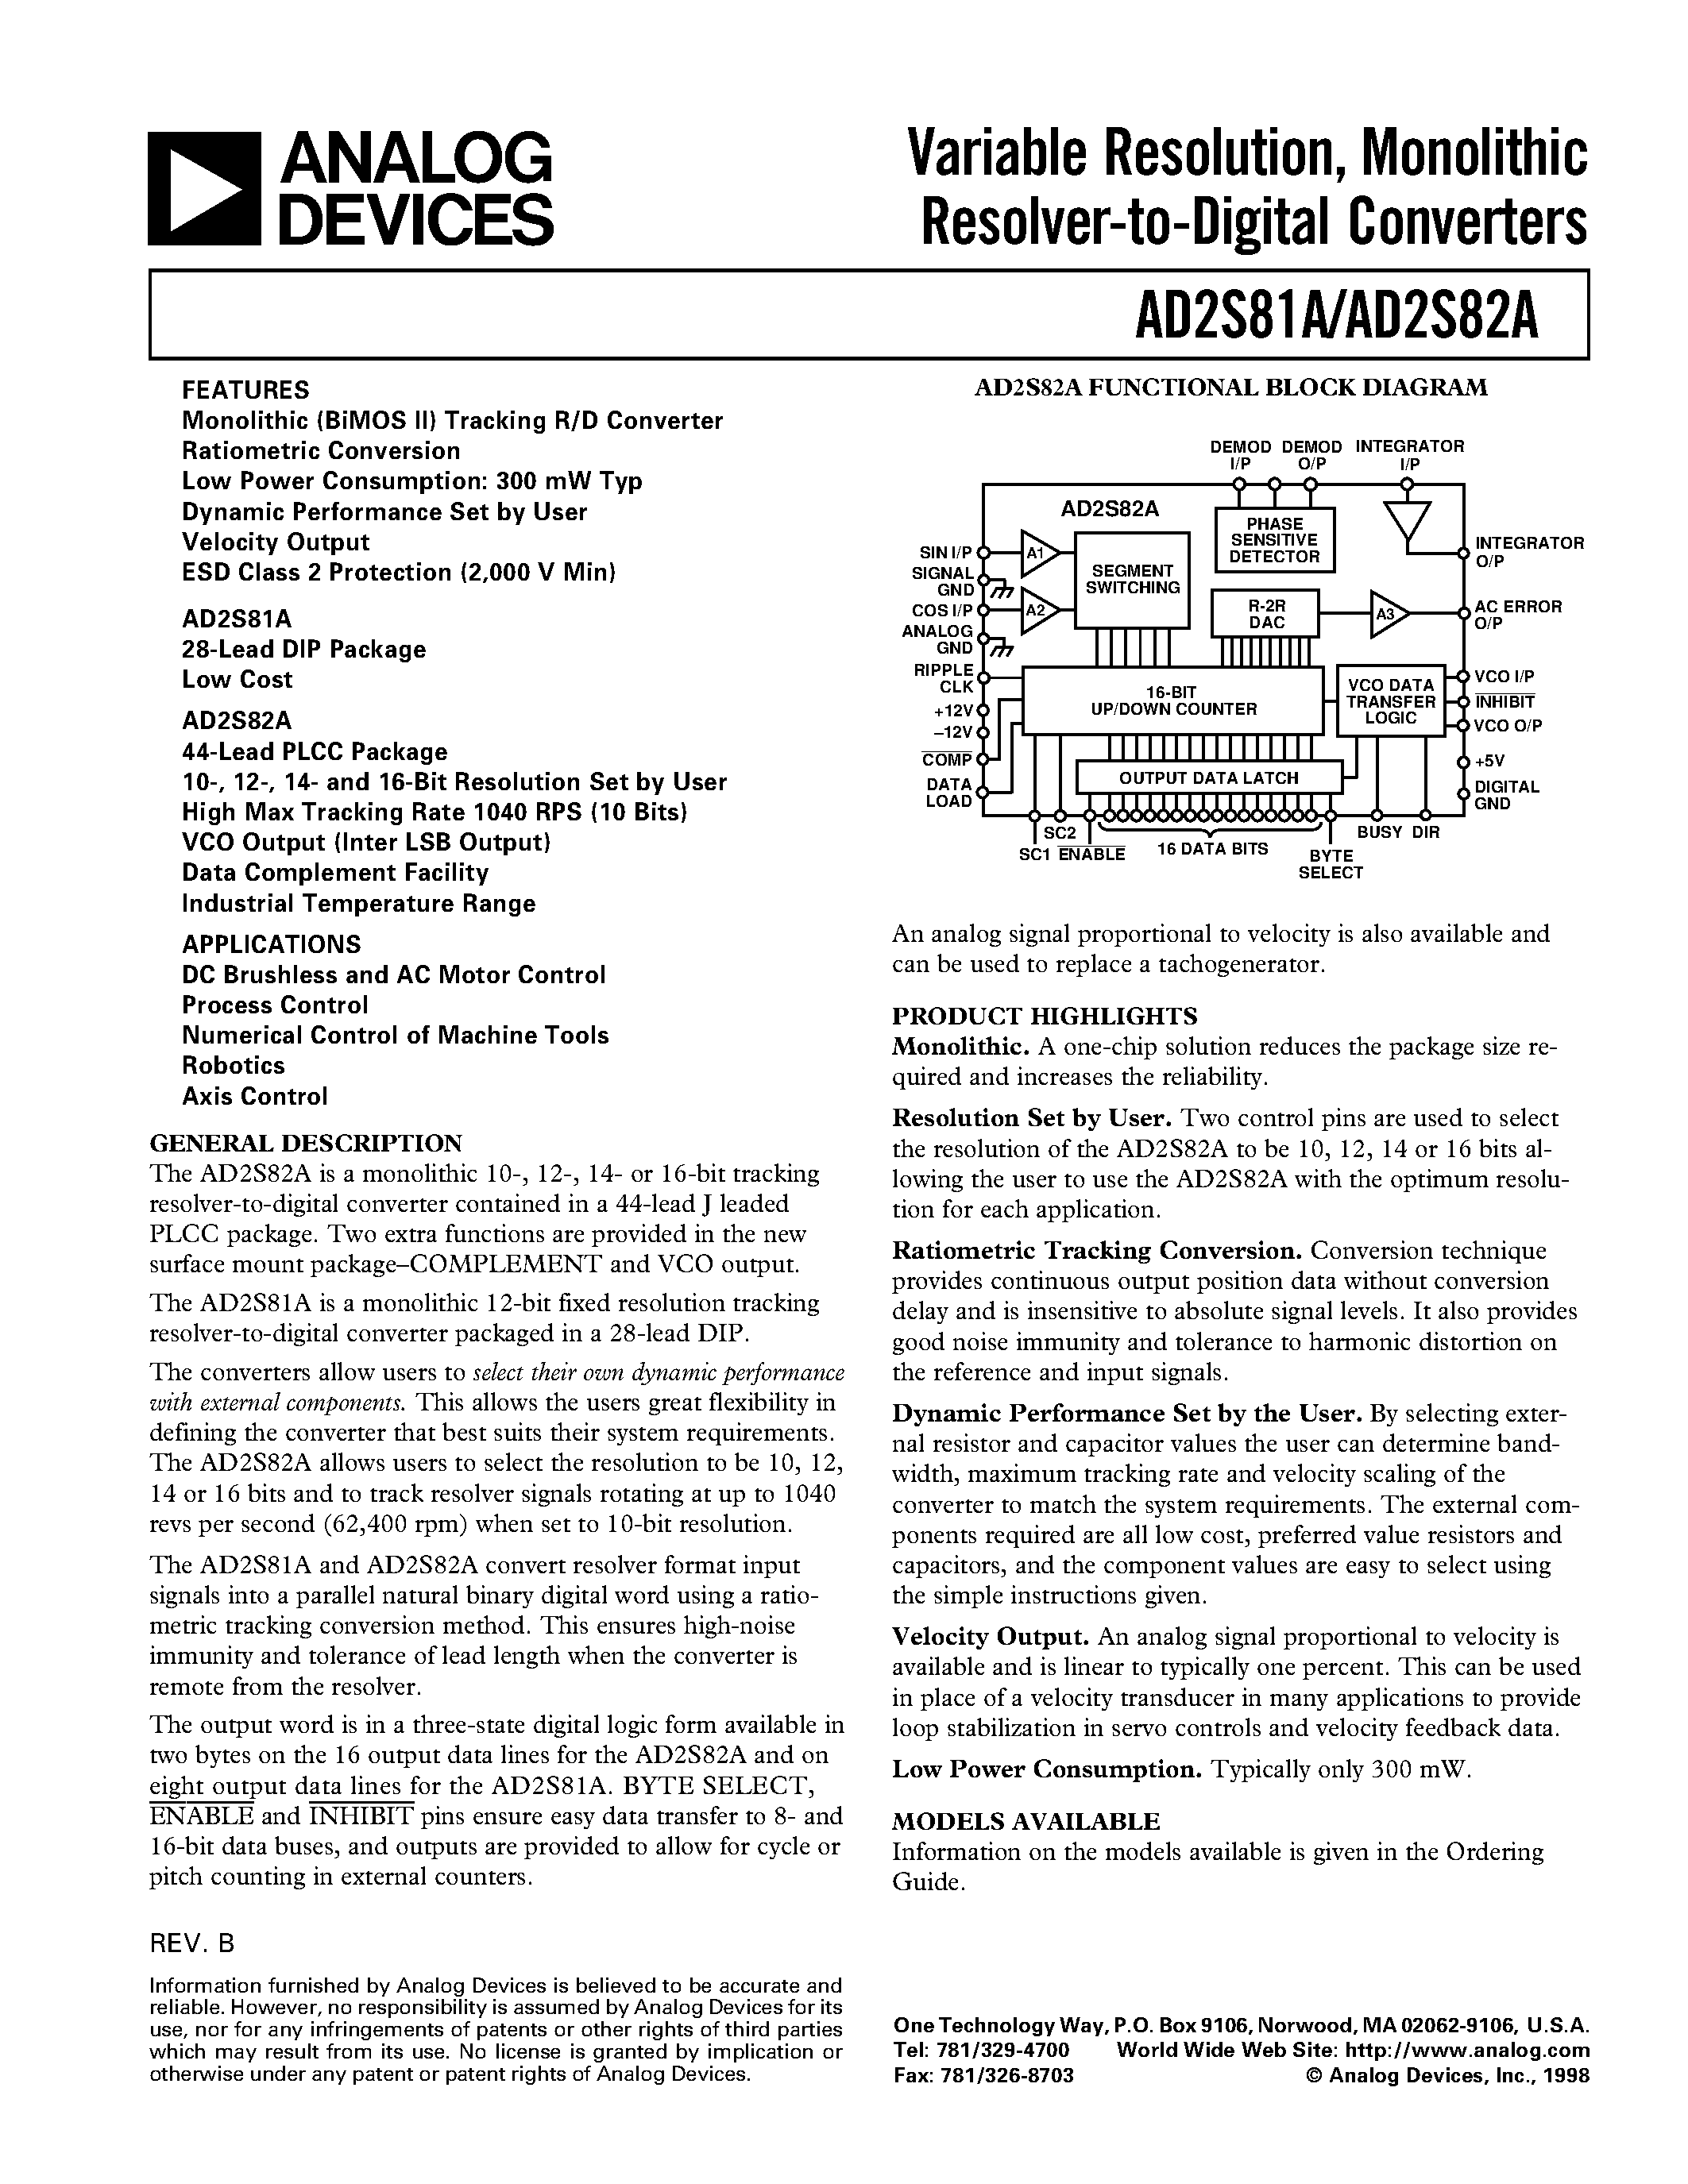 Datasheet AD2S82 - Variable Resolution/ Monolithic Resolver-to-Digital Converters page 1